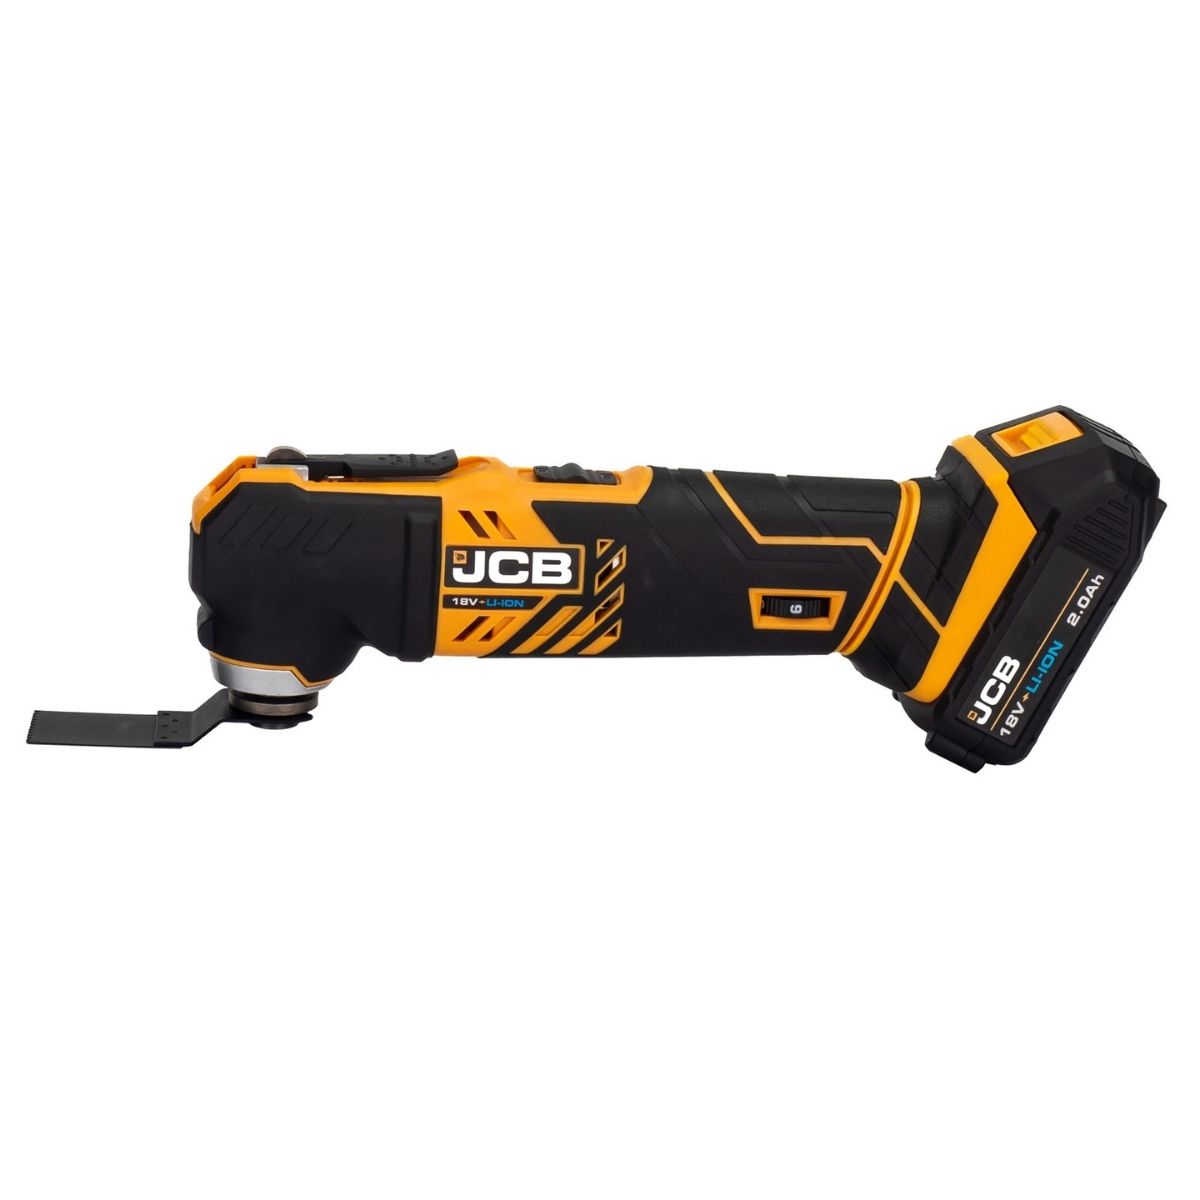 JCB 18MT-2X-B 18V Multi Tool with 1x2.0Ah Battery & Charger